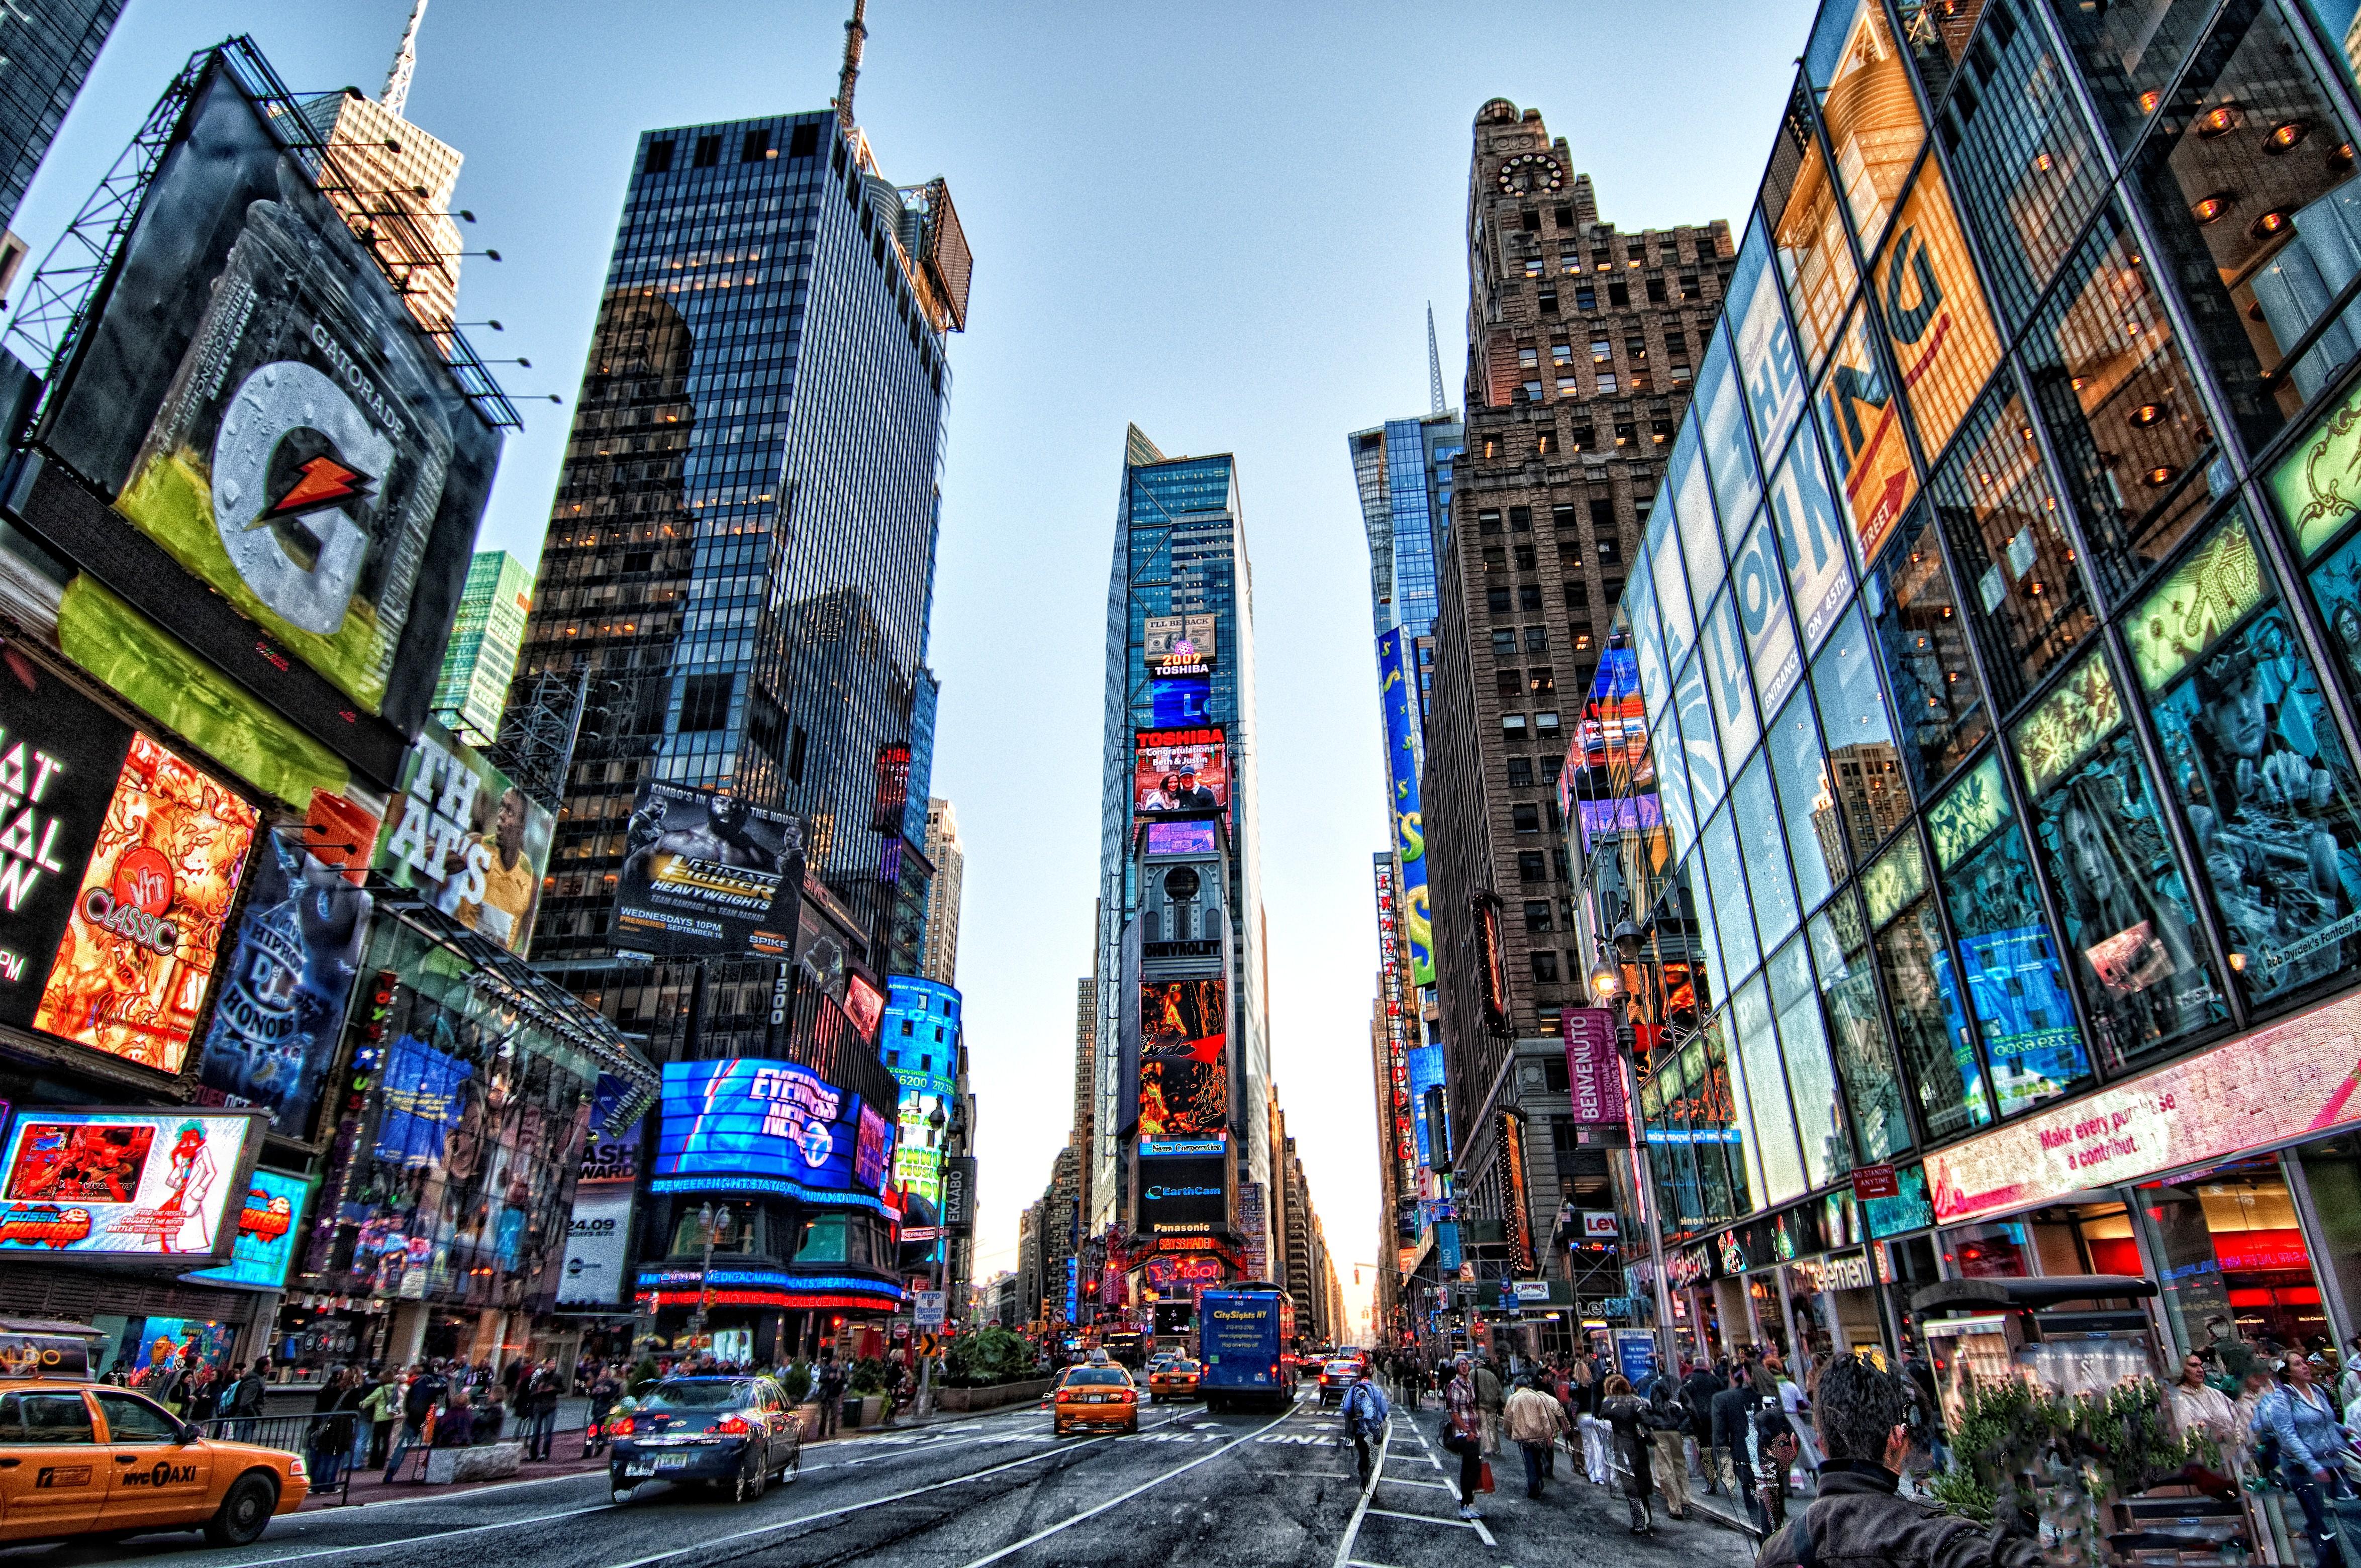 Amazing Wallpaper of Times Square in New York City